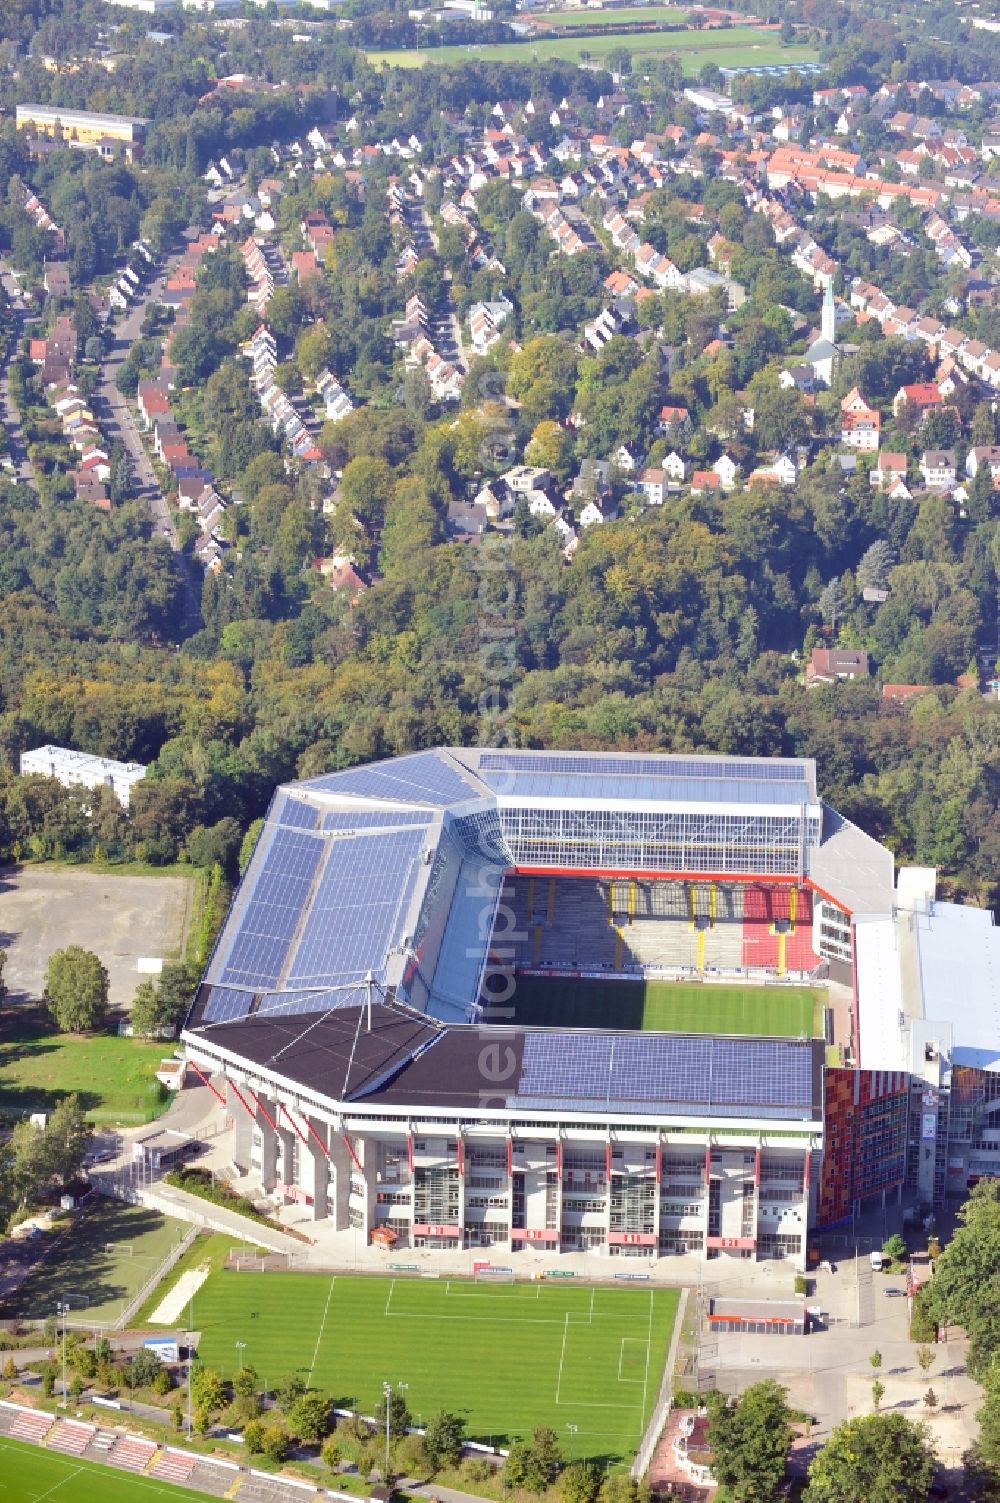 Kaiserslautern from above - Sports facility grounds of the Arena stadium Fritz-Walter-Stadion in destrict Betzenberg on Fritz-Walter-Strasse in Kaiserslautern in the state Rhineland-Palatinate, Germany